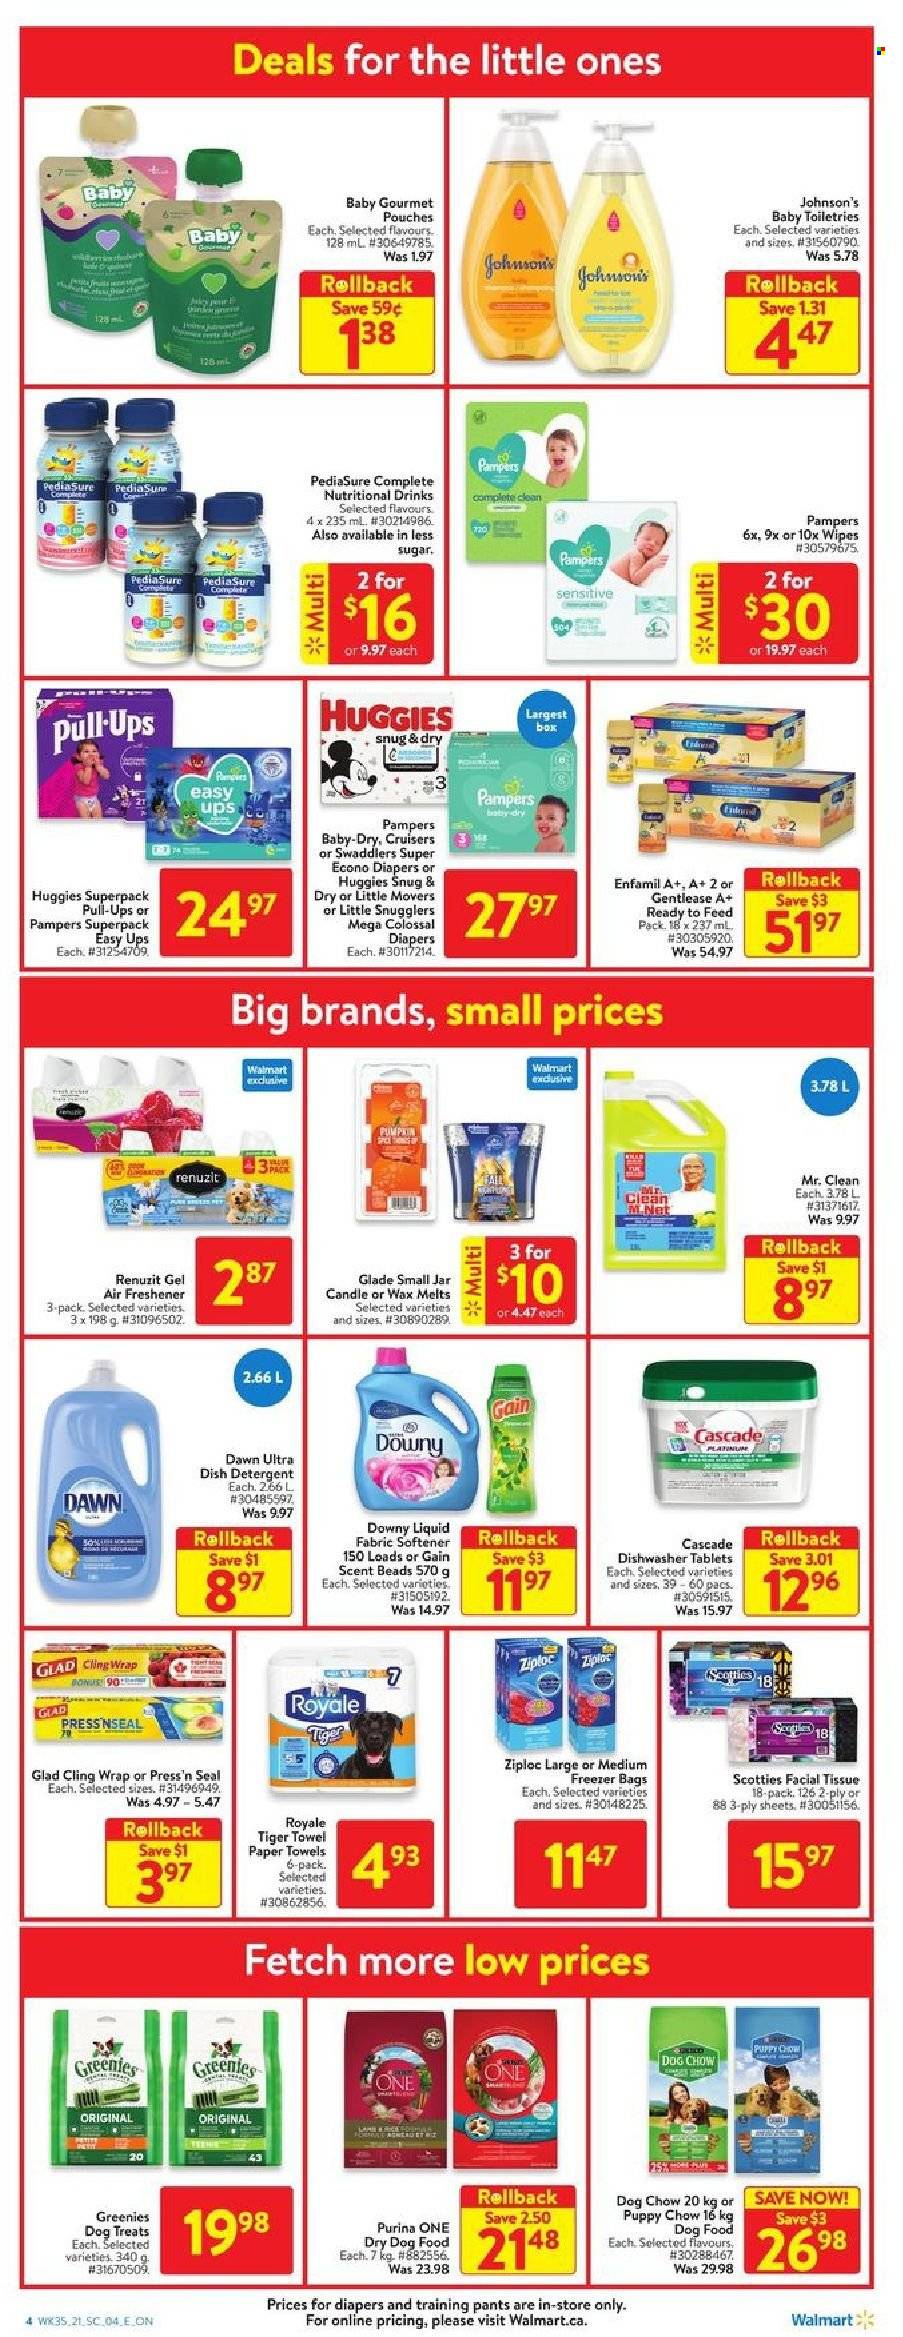 thumbnail - Walmart Flyer - September 23, 2021 - September 29, 2021 - Sales products - Enfamil, wipes, pants, nappies, Johnson's, baby pants, tissues, kitchen towels, paper towels, Gain, fabric softener, Cascade, Downy Laundry, dishwasher cleaner, dishwasher tablets, bag, Ziploc, freezer bag, candle, Renuzit, air freshener, Glade, Greenies, animal food, dog food, Dog Chow, Purina, dry dog food, freezer, dishwasher, Snug, detergent, Huggies, Pampers. Page 10.